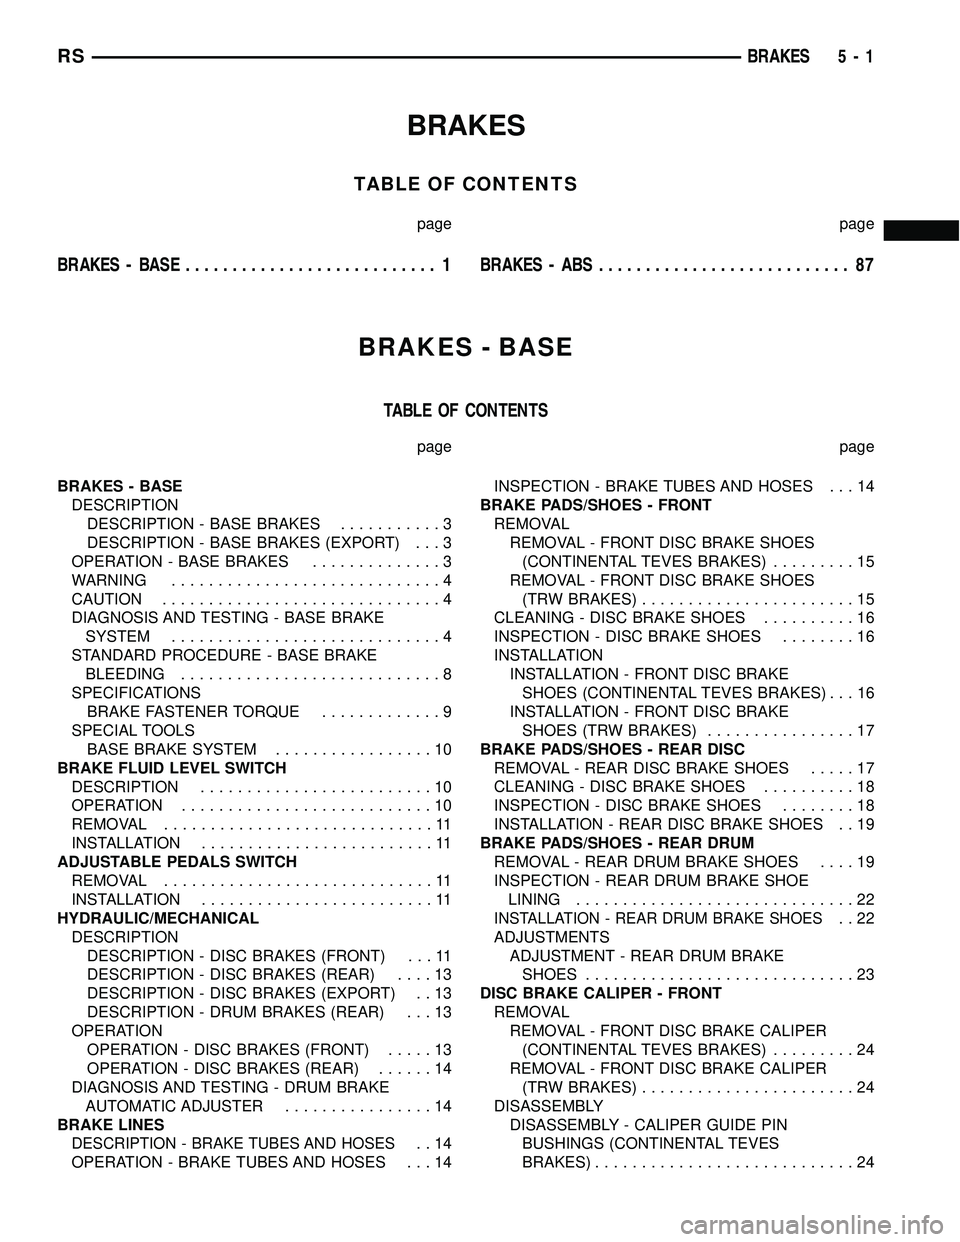 CHRYSLER VOYAGER 2005  Service Manual BRAKES
TABLE OF CONTENTS
page page
BRAKES - BASE........................... 1BRAKES - ABS........................... 87
BRAKES - BASE
TABLE OF CONTENTS
page page
BRAKES - BASE
DESCRIPTION
DESCRIPTION 